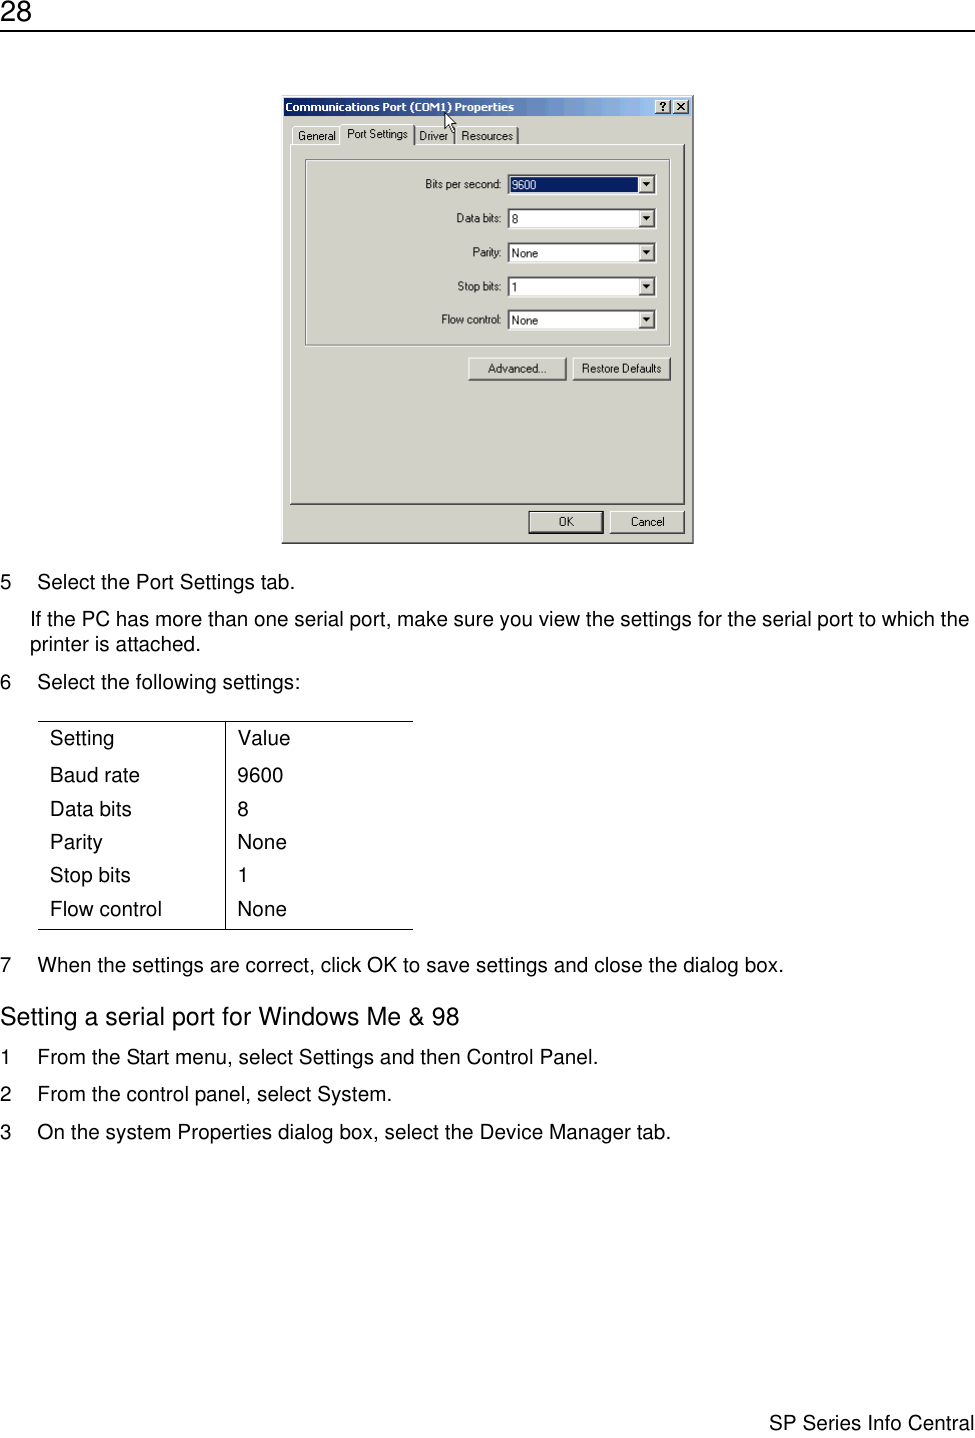 28                      SP Series Info Central5 Select the Port Settings tab.If the PC has more than one serial port, make sure you view the settings for the serial port to which the printer is attached.6 Select the following settings:7 When the settings are correct, click OK to save settings and close the dialog box.Setting a serial port for Windows Me &amp; 981 From the Start menu, select Settings and then Control Panel. 2 From the control panel, select System.3 On the system Properties dialog box, select the Device Manager tab.Setting ValueBaud rate 9600Data bits 8Parity NoneStop bits 1Flow control None